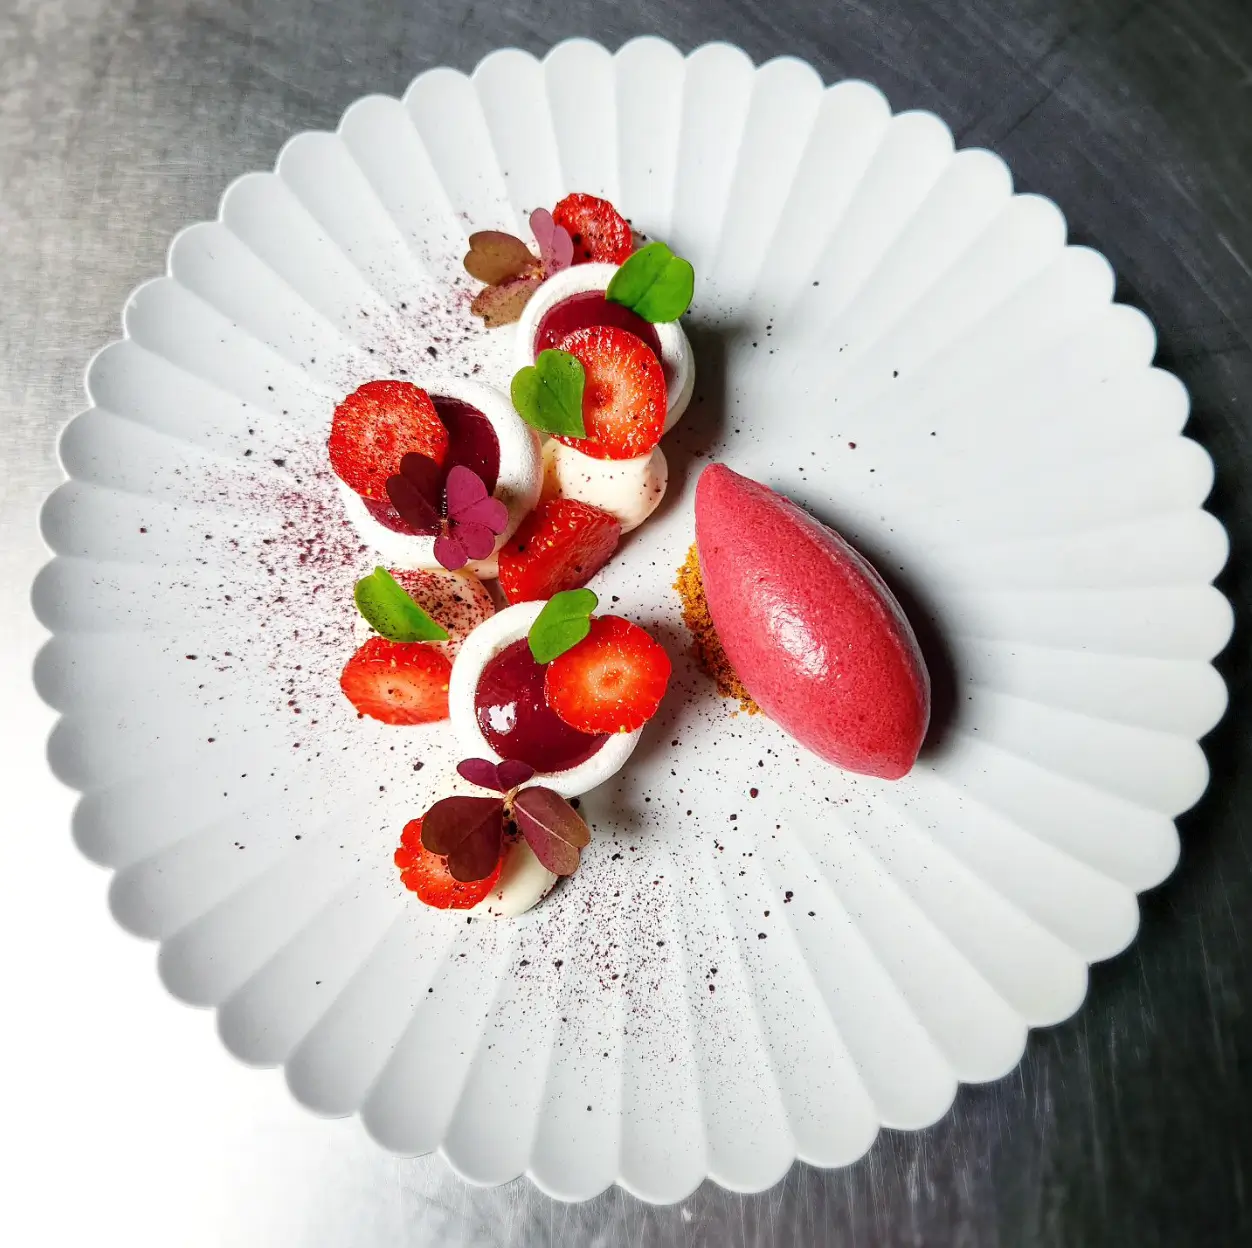 A beautifully plated dessert at Tomy & Co with strawberries, meringue, and a scoop of sorbet on a white fluted plate.